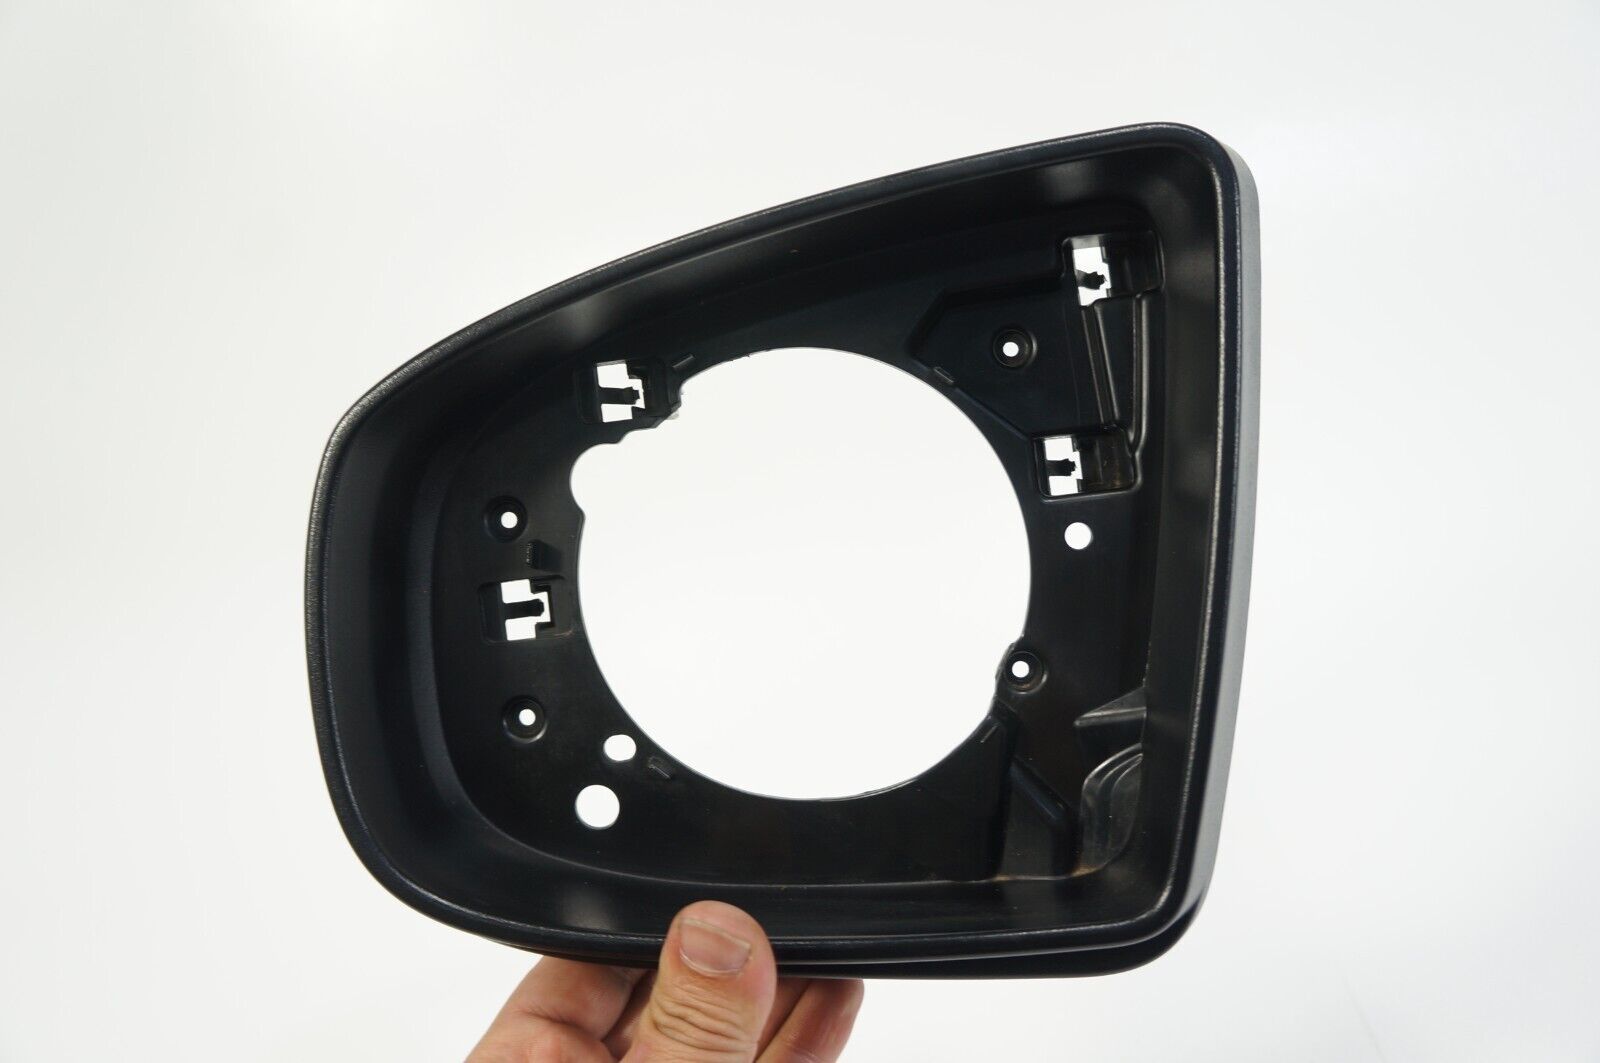 Primary image for 07-2013 bmw x5 e70 left driver side rear view door mirror frame cover trim